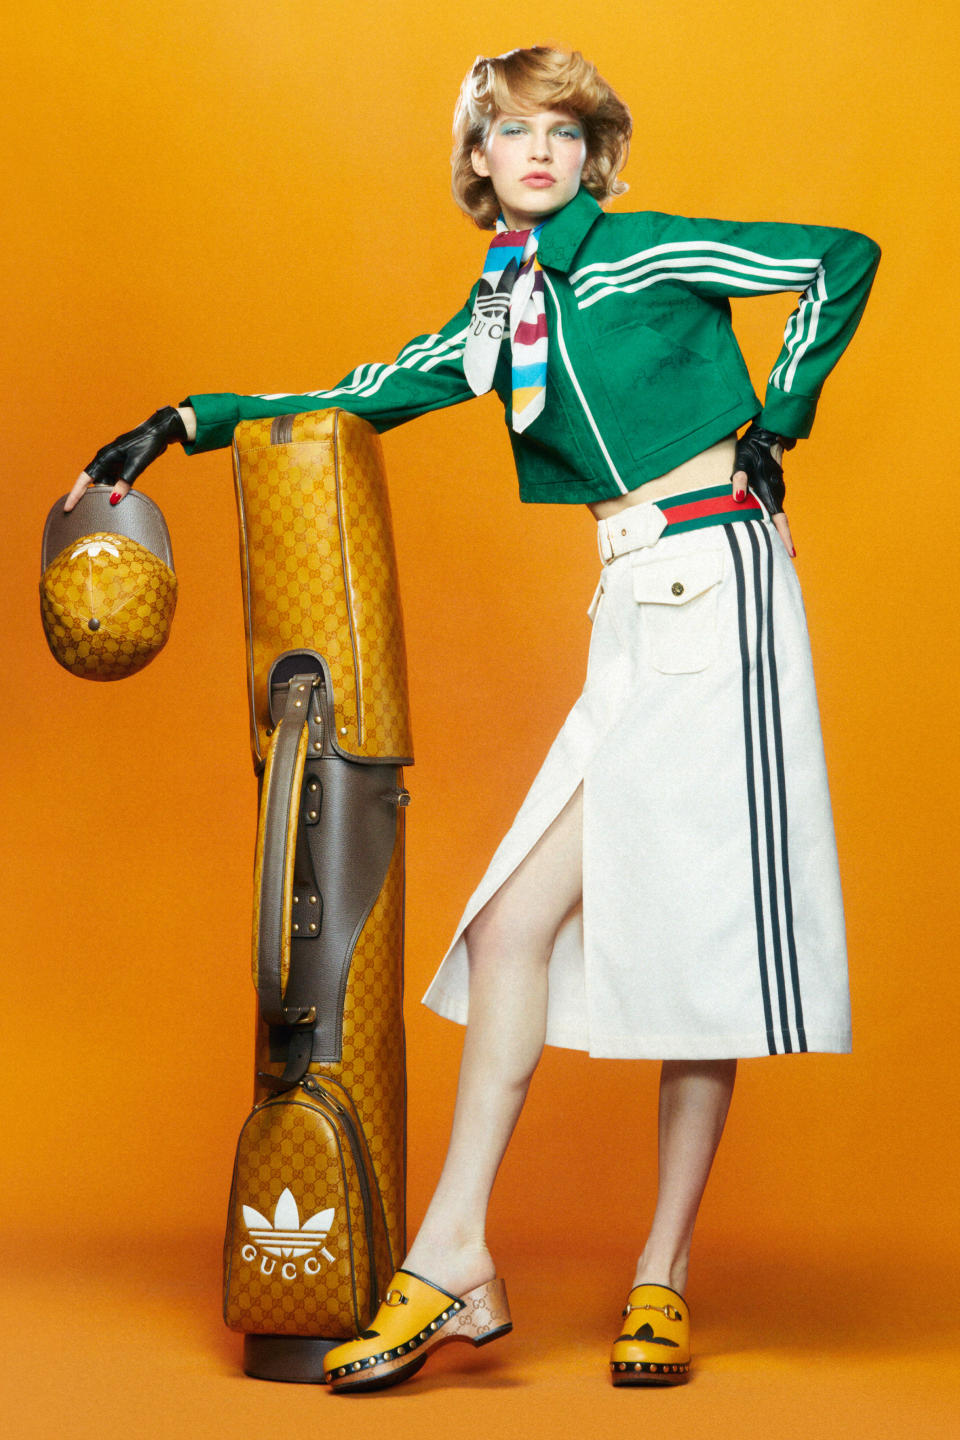 A look from the Adidas x Gucci collection. - Credit: Carlijn Jacobs/Courtesy of Gucci